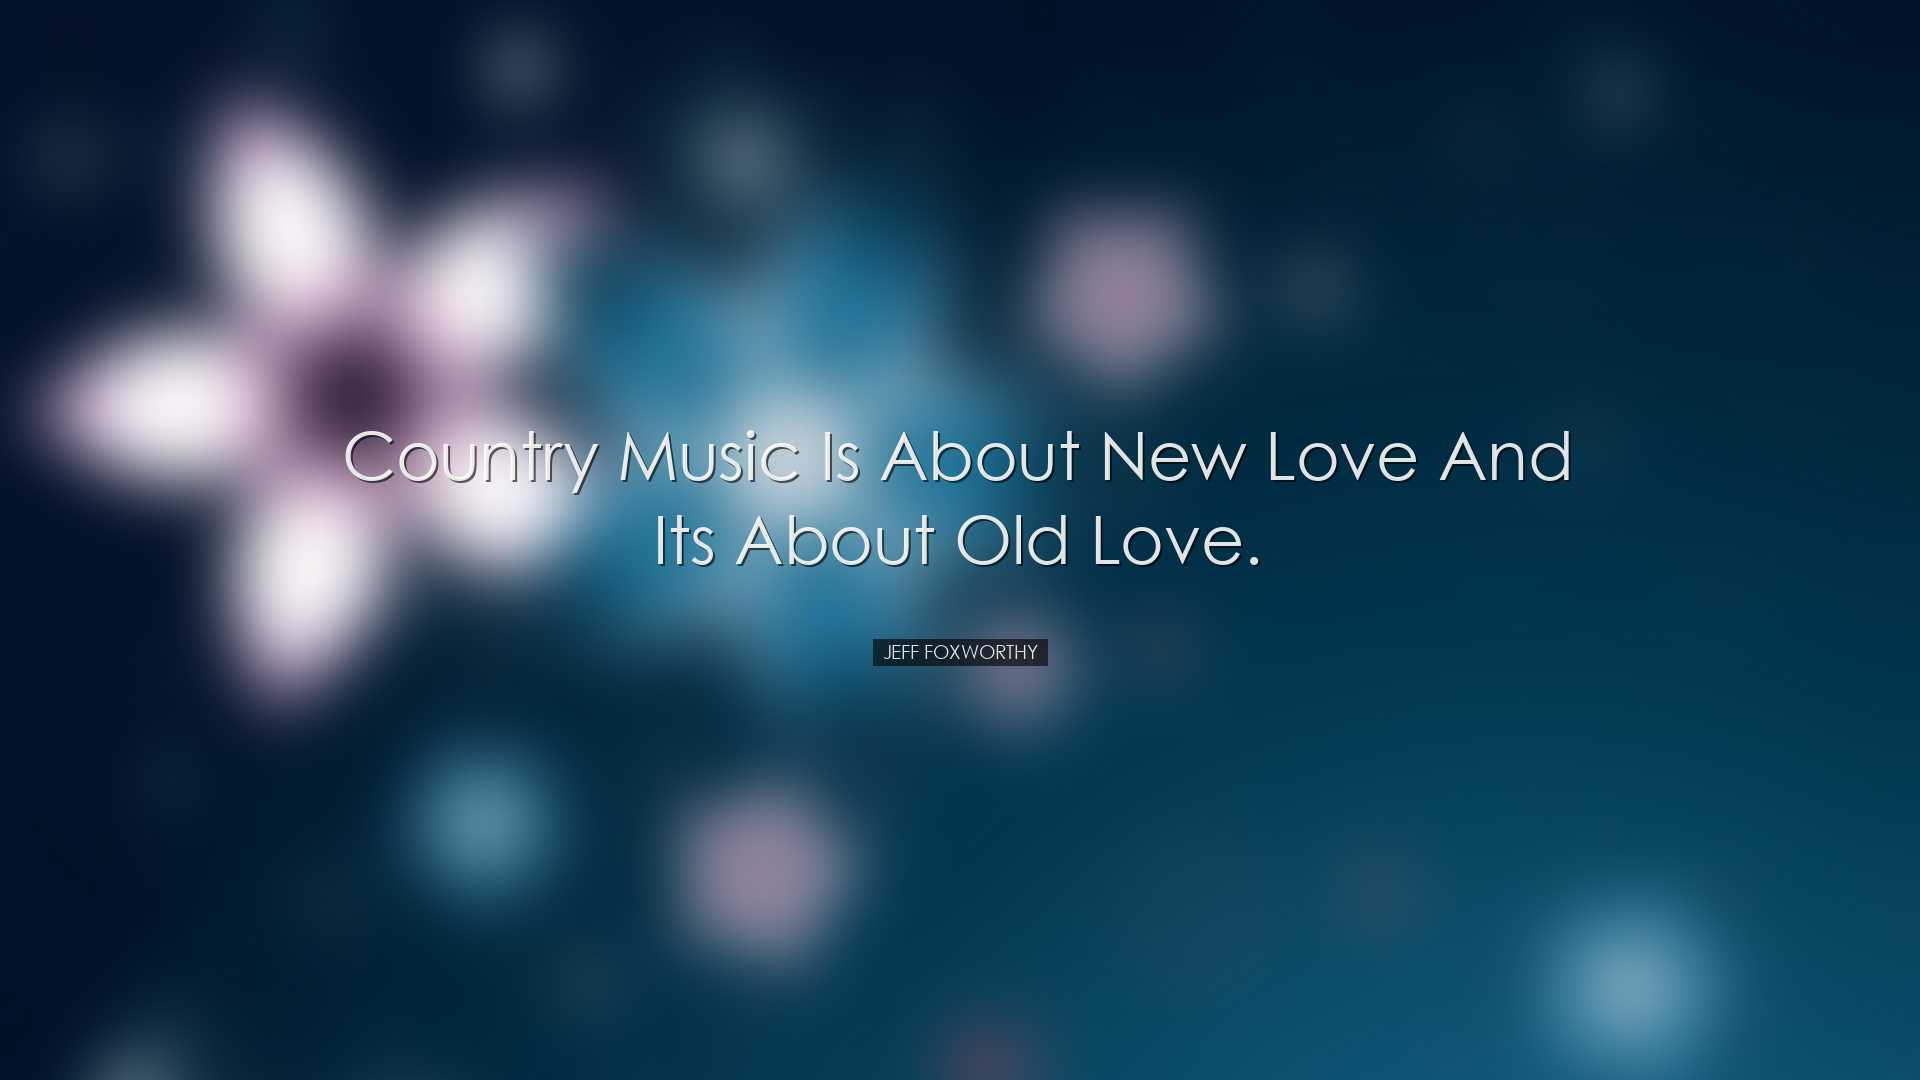 Country music is about new love and its about old love. - Jeff Fox